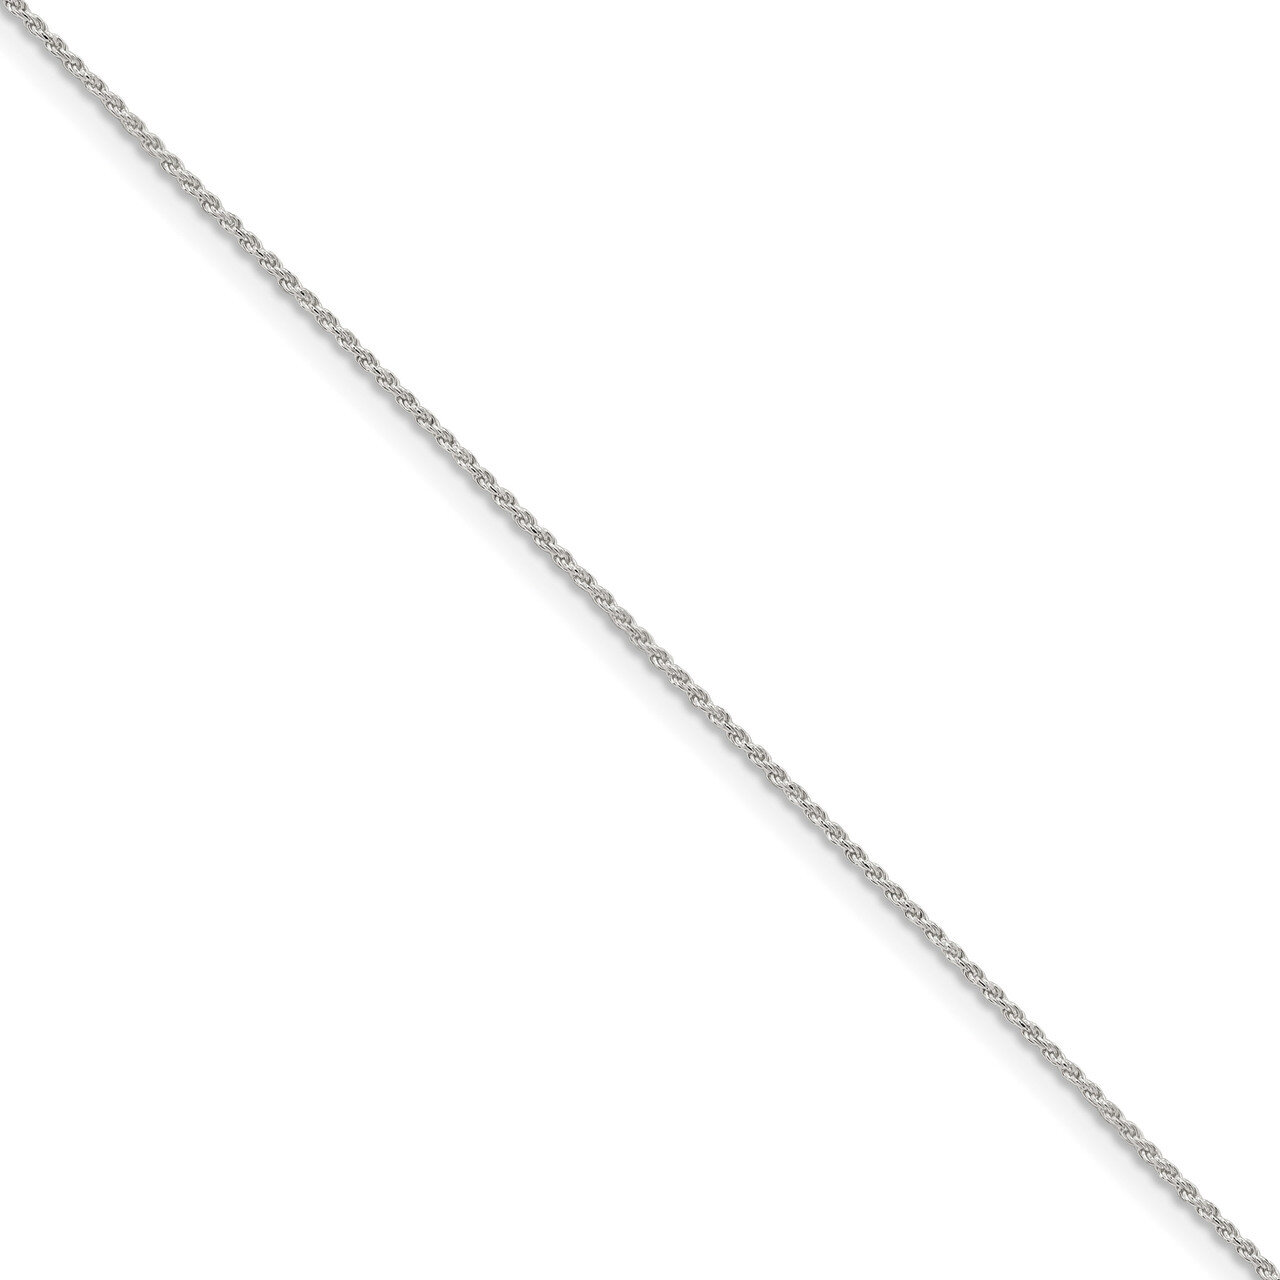 8 Inch 1.1mm Diamond-cut Rope Chain Sterling Silver QDC015-8